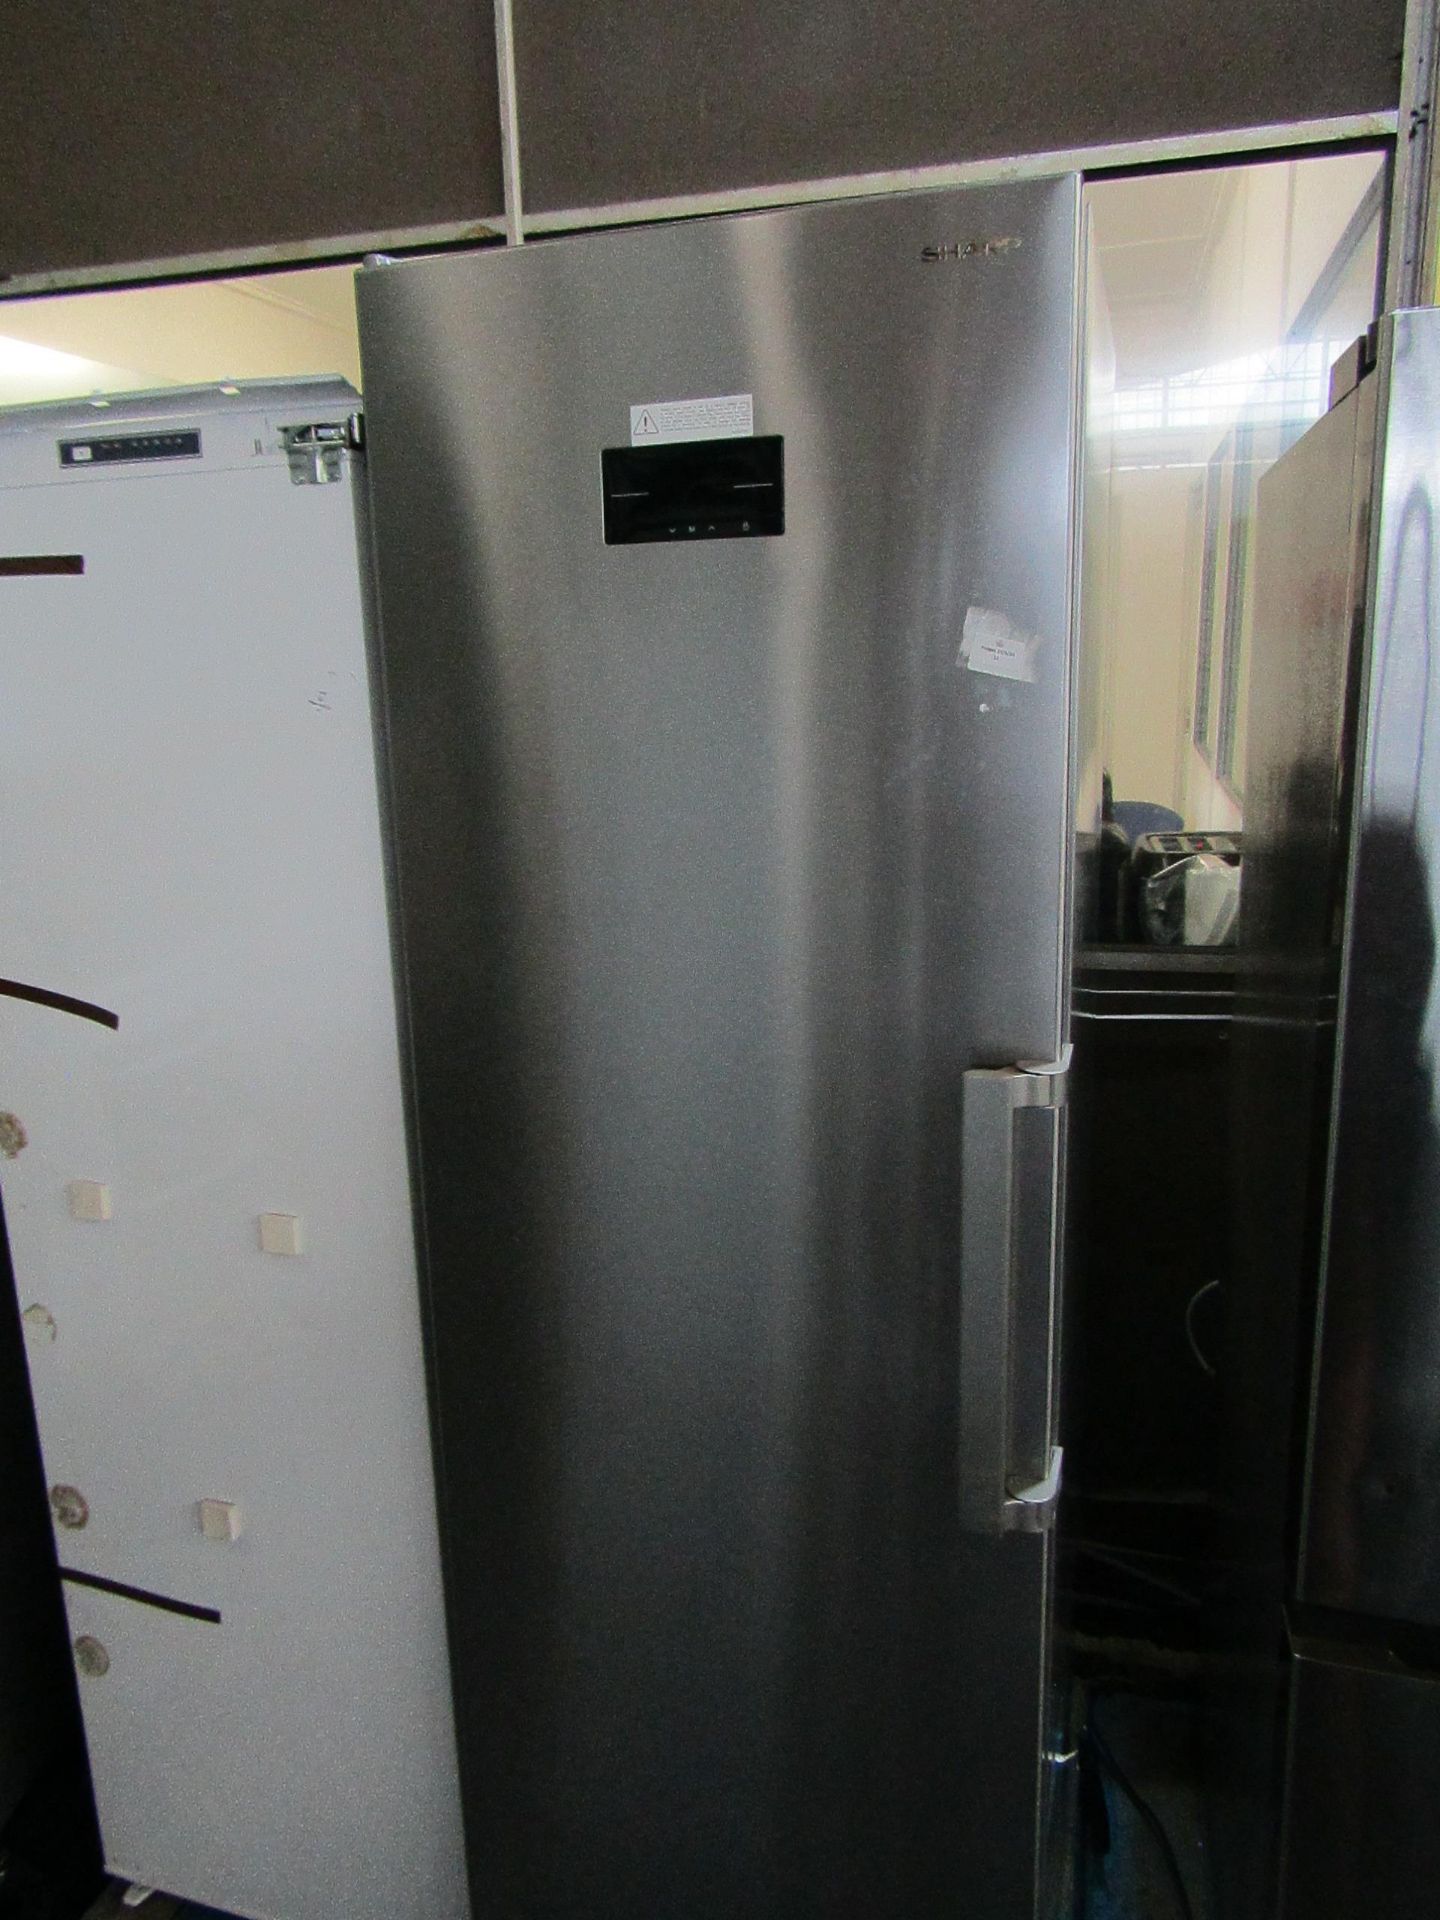 Sharp Tall Silver Freestanding Freezer - used, not getting cold